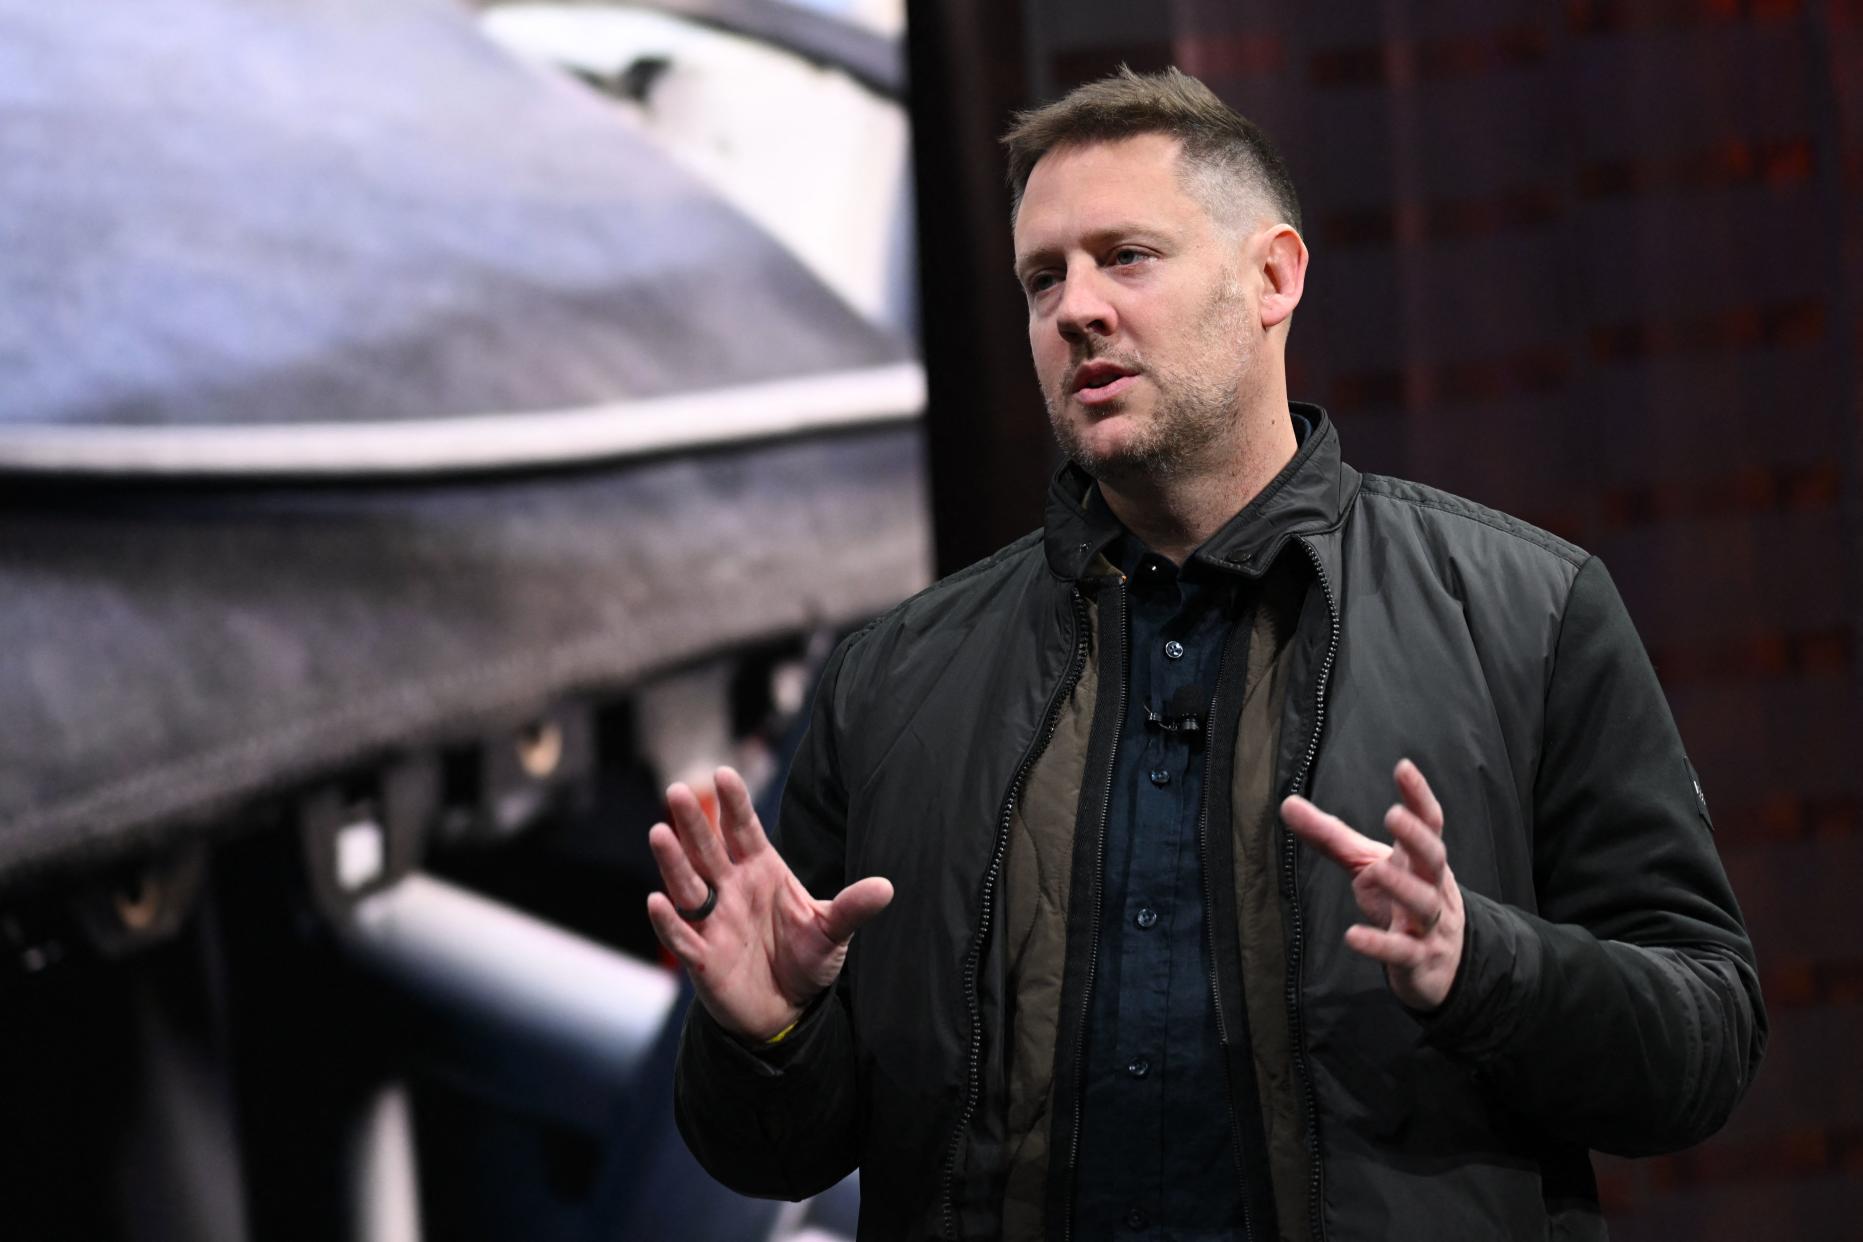 Neill Blomkamp, Director of Gran Turismo, speaks during the Consumer Electronics Show (CES) in Las Vegas, Nevada, on January 4, 2023. (Photo by Patrick T. Fallon / AFP) (Photo by PATRICK T. FALLON/AFP via Getty Images)